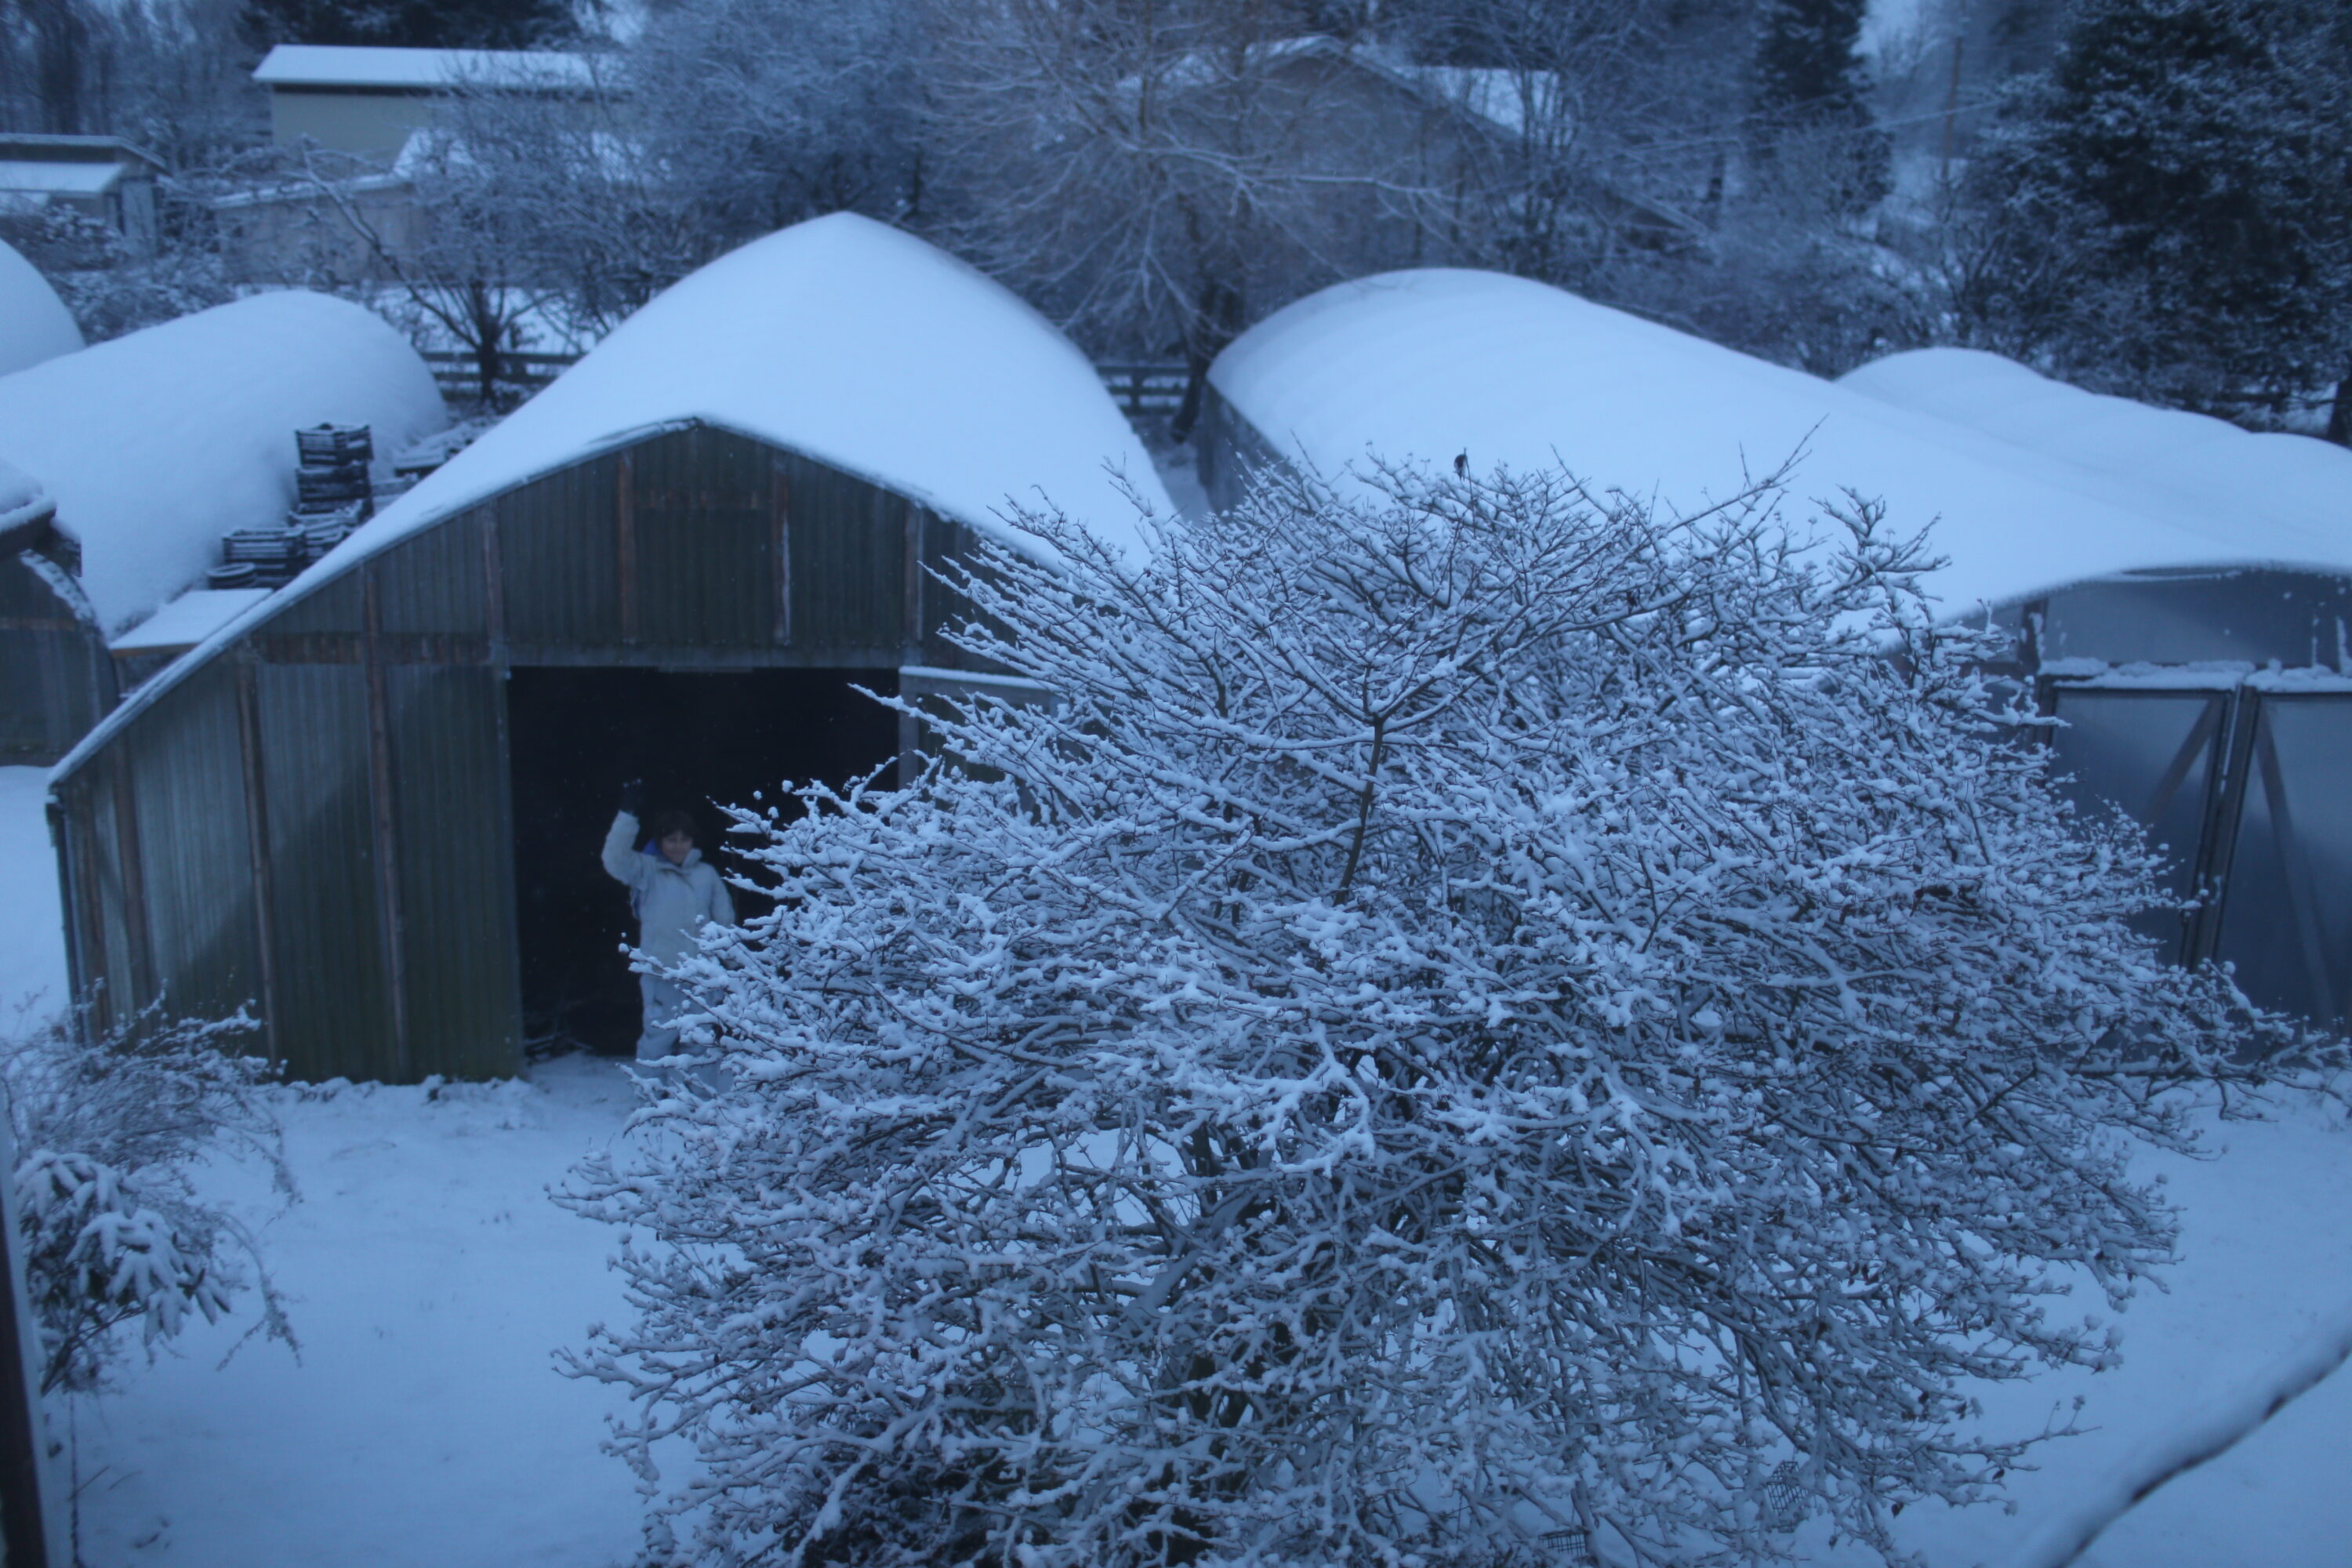 Greenhouses covered in snow